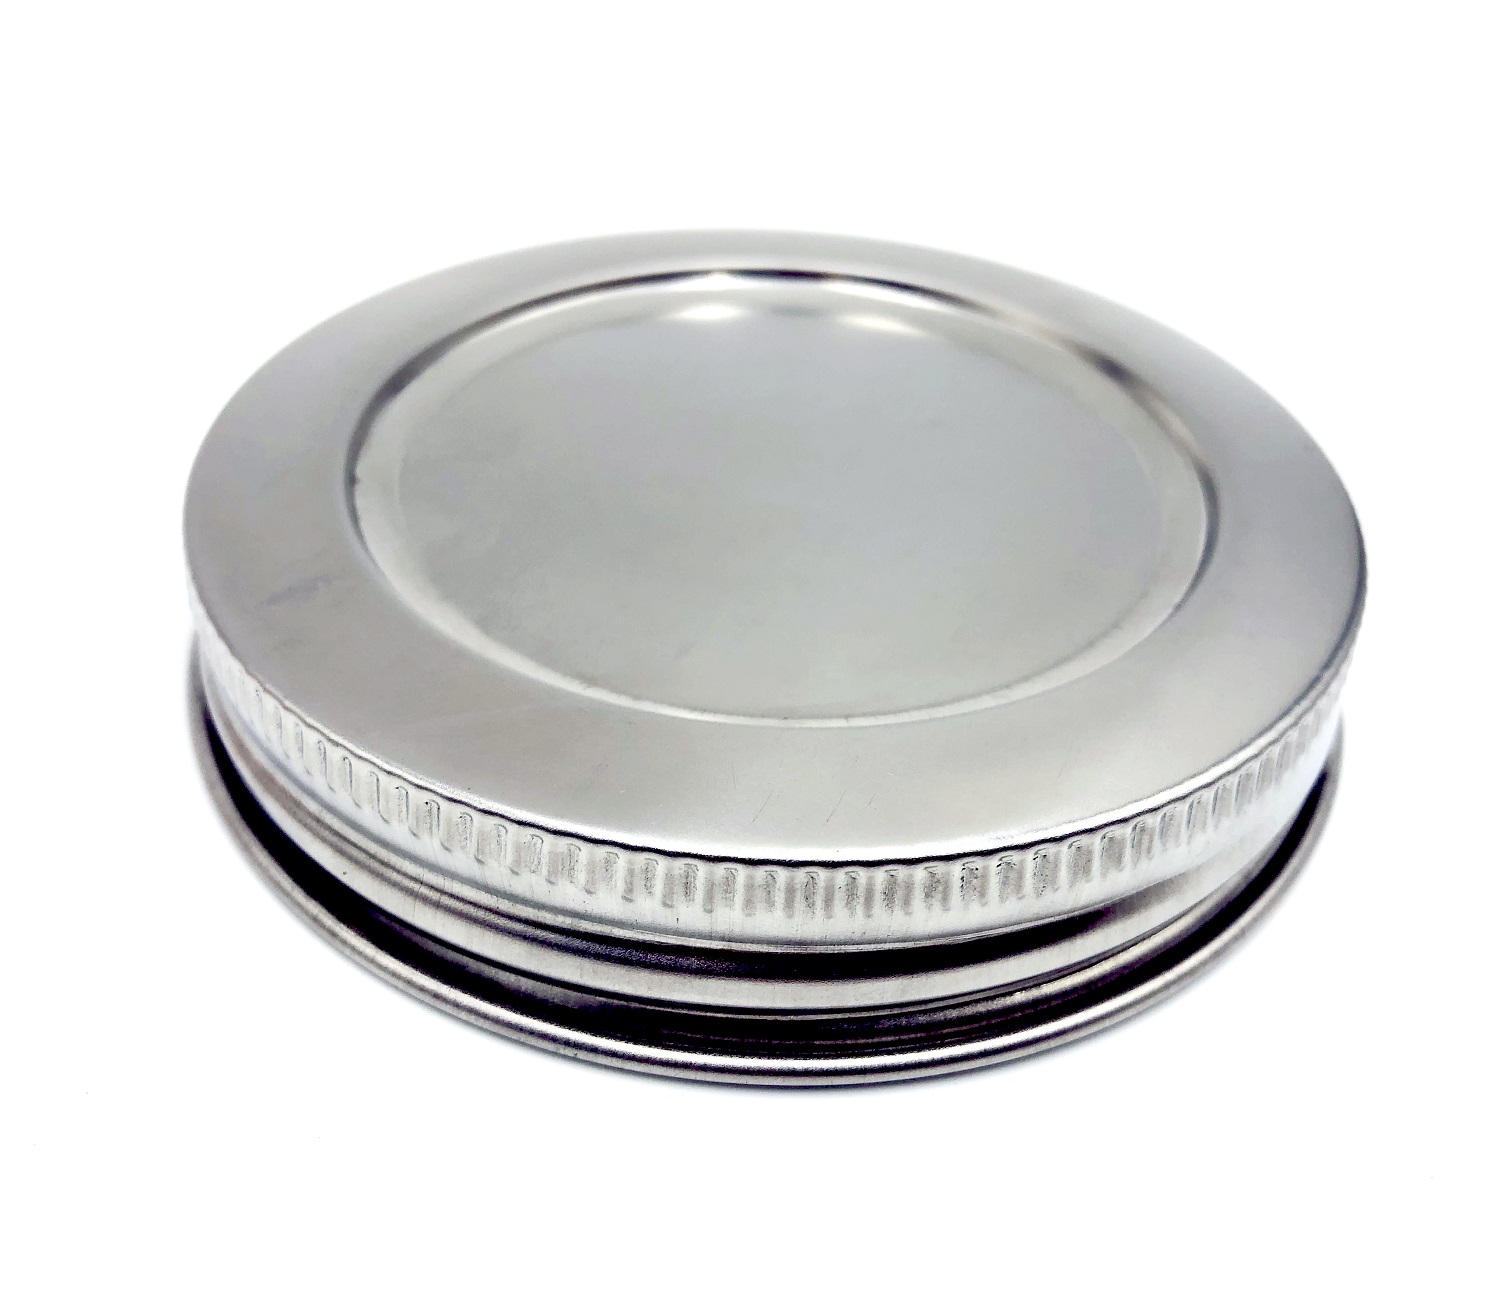 Stainless steel lid with sealing gasket for Mason jars